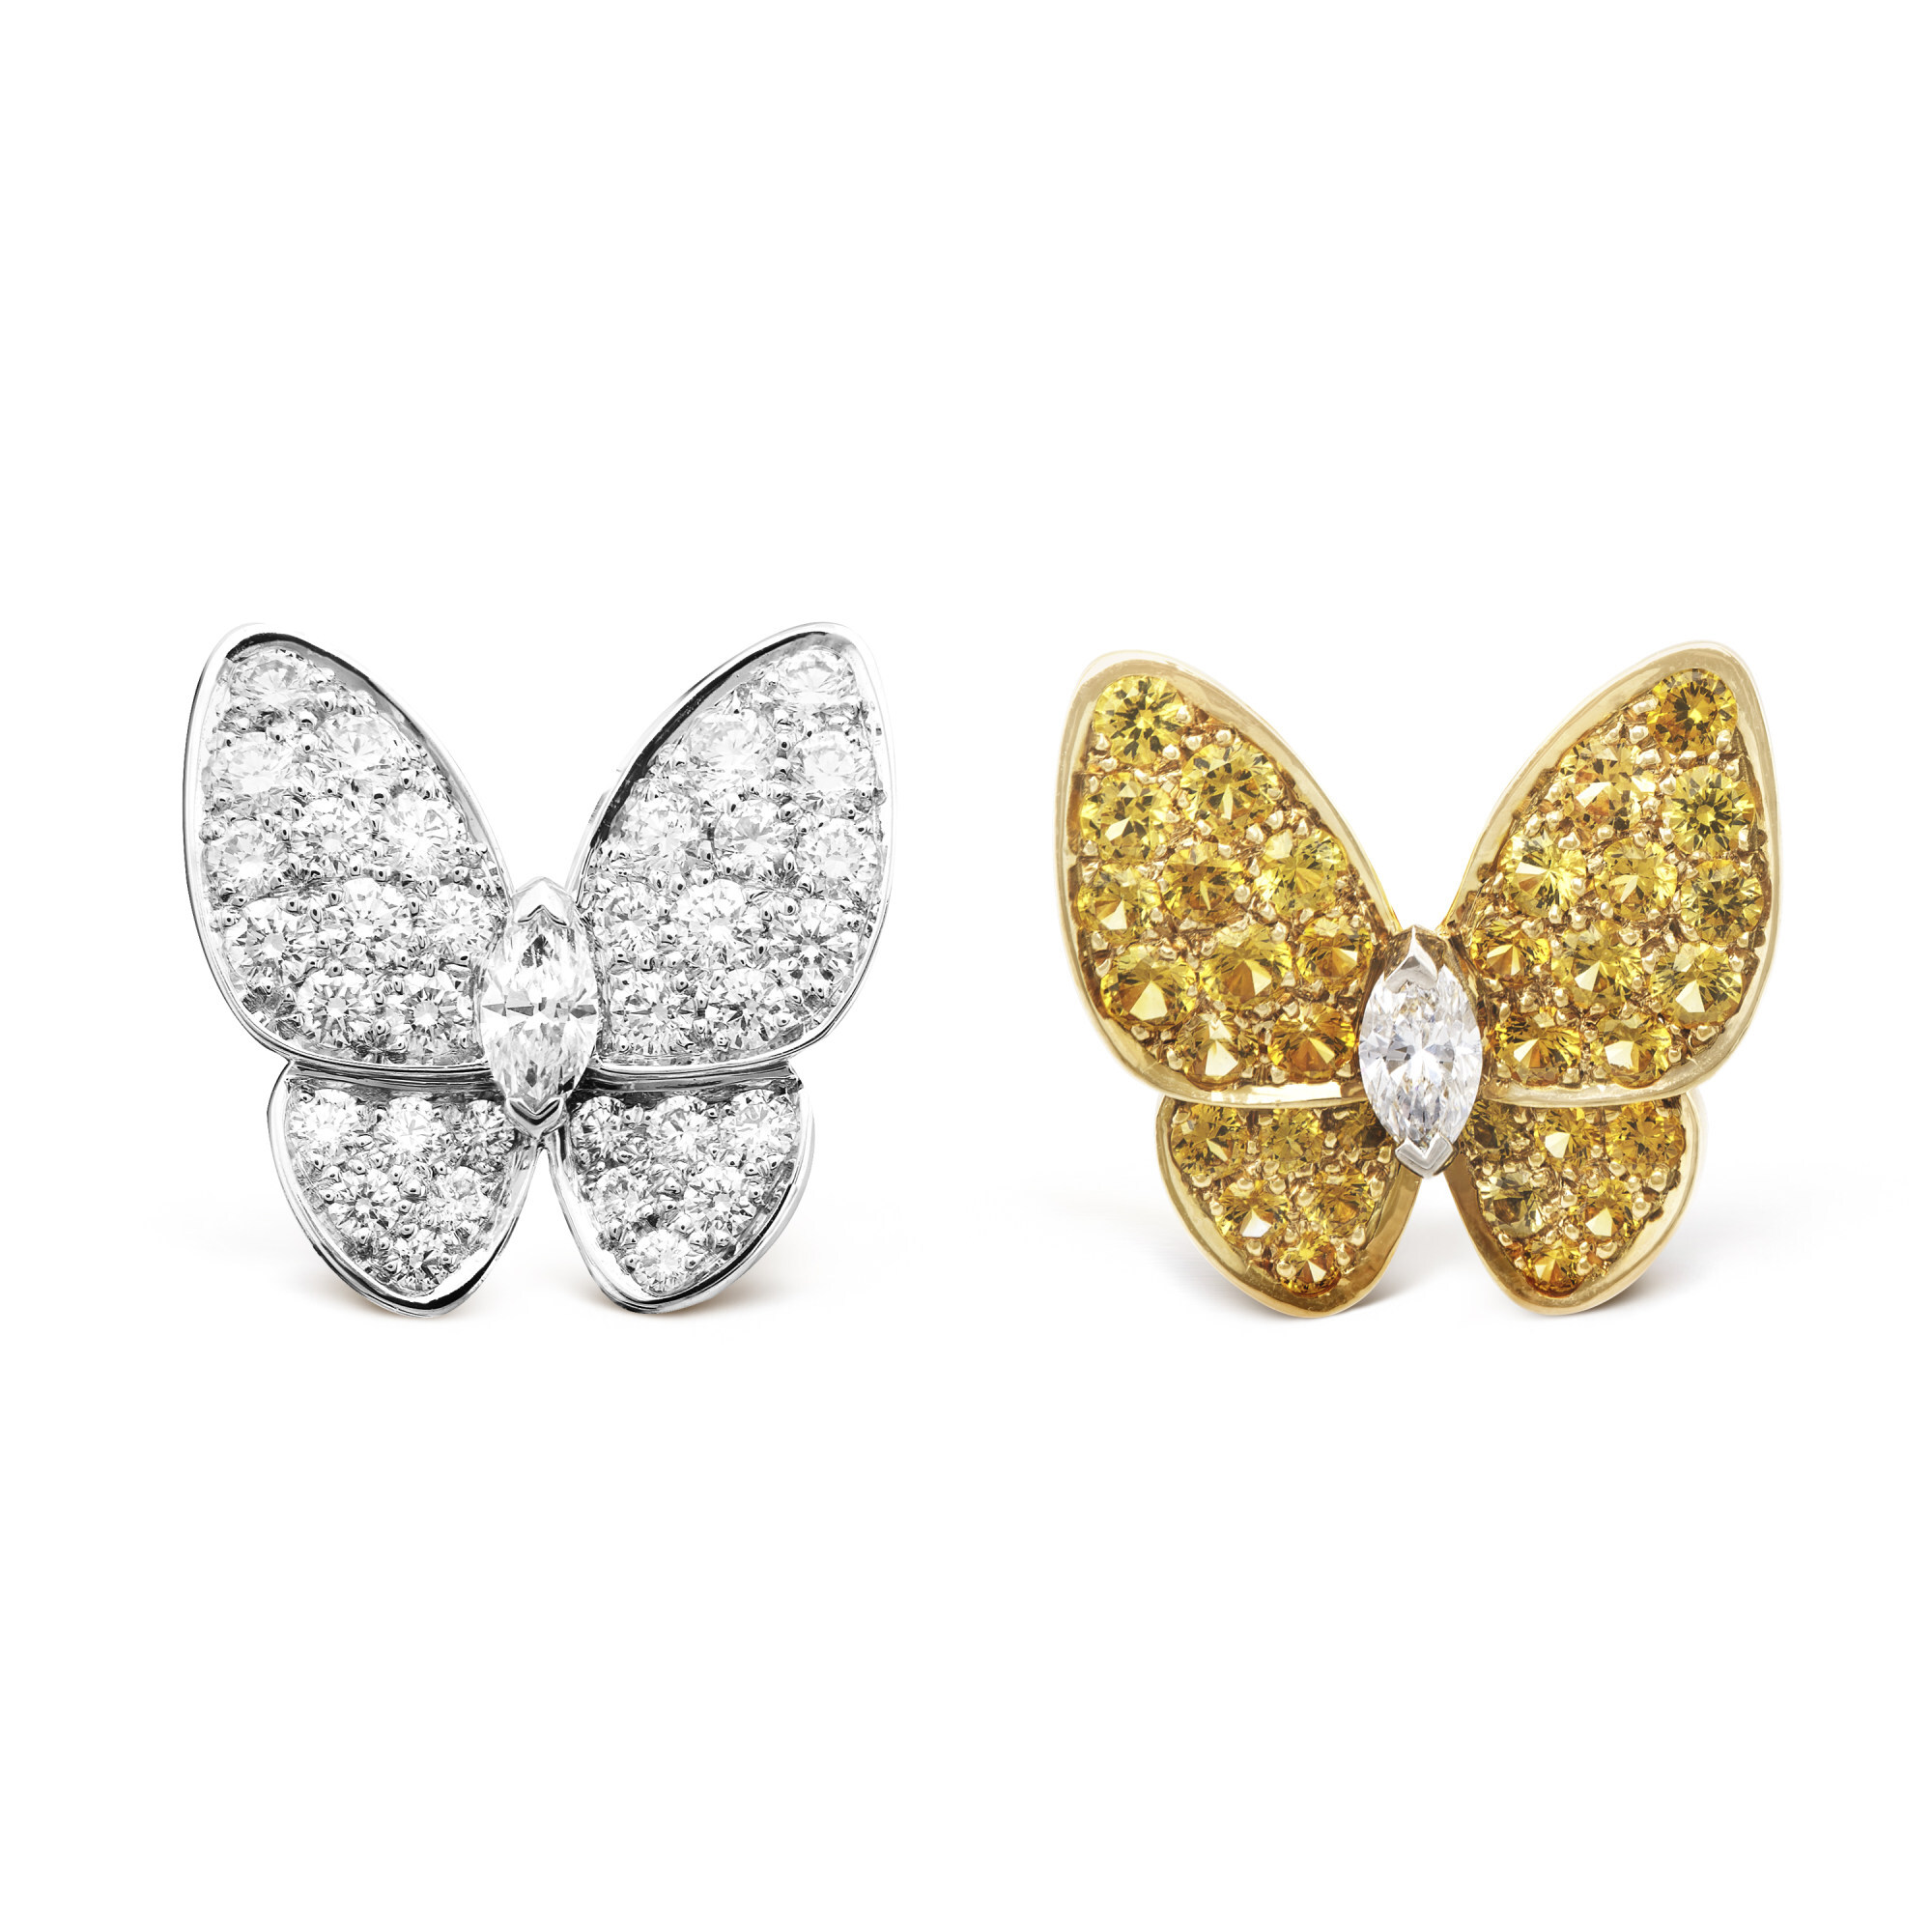 STYLE Edit: Van Cleef & Arpels embraces spring with its new Two